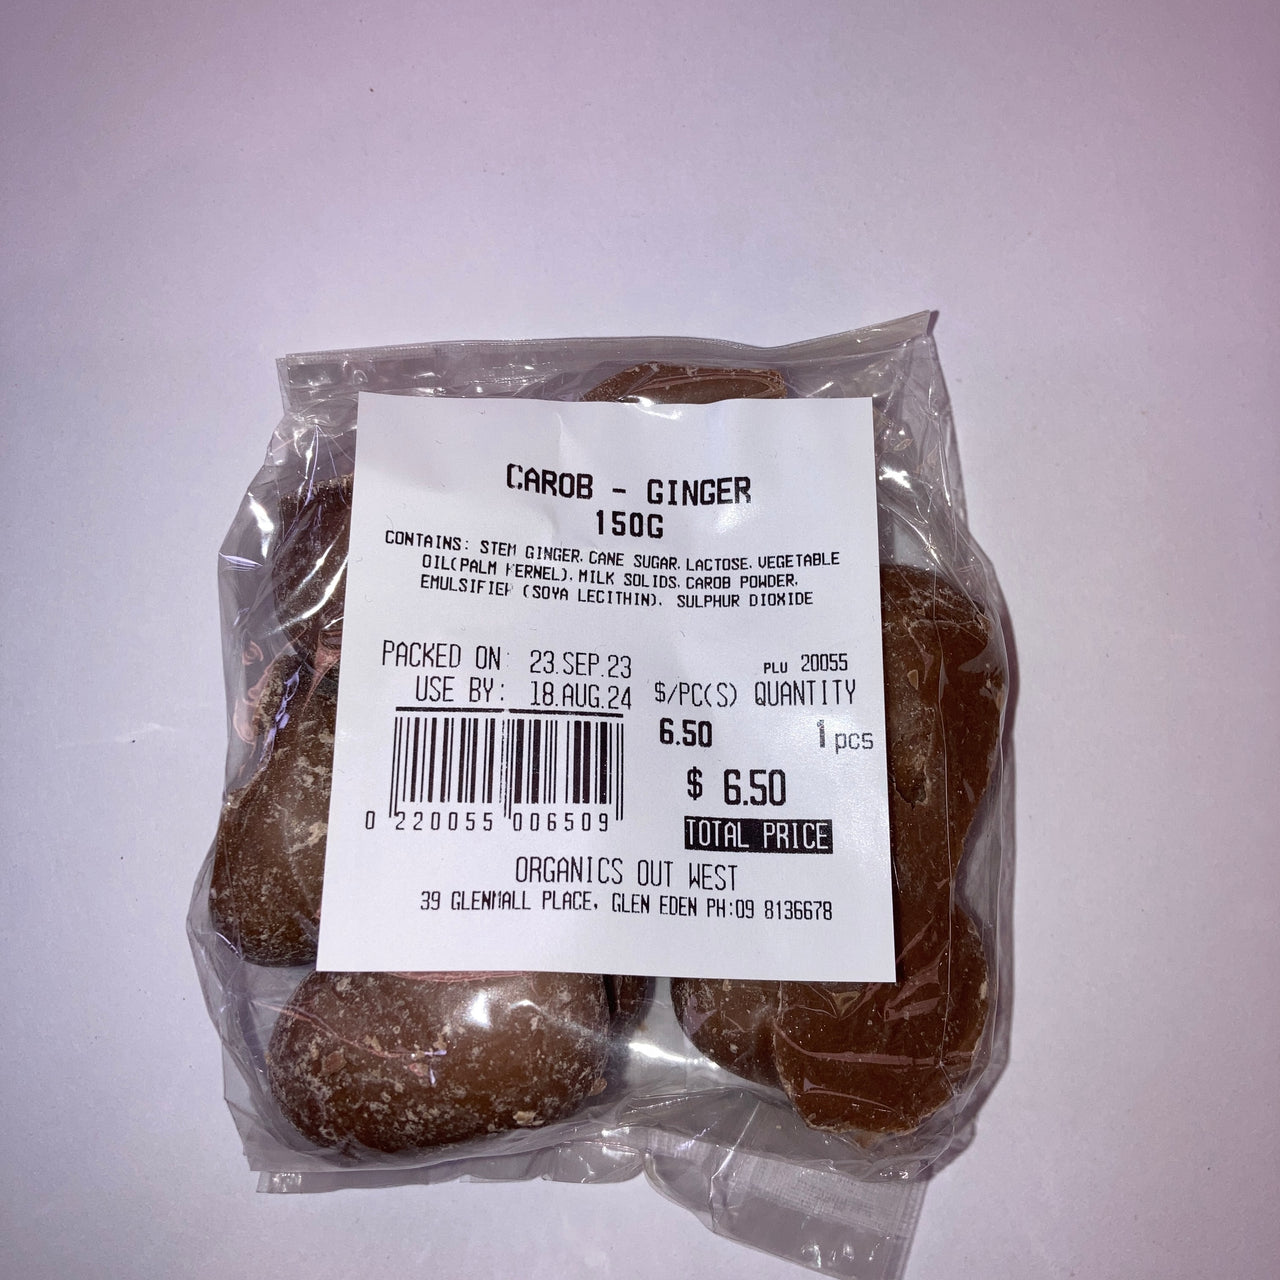 Organics Out West - Carob Ginger - [200g]